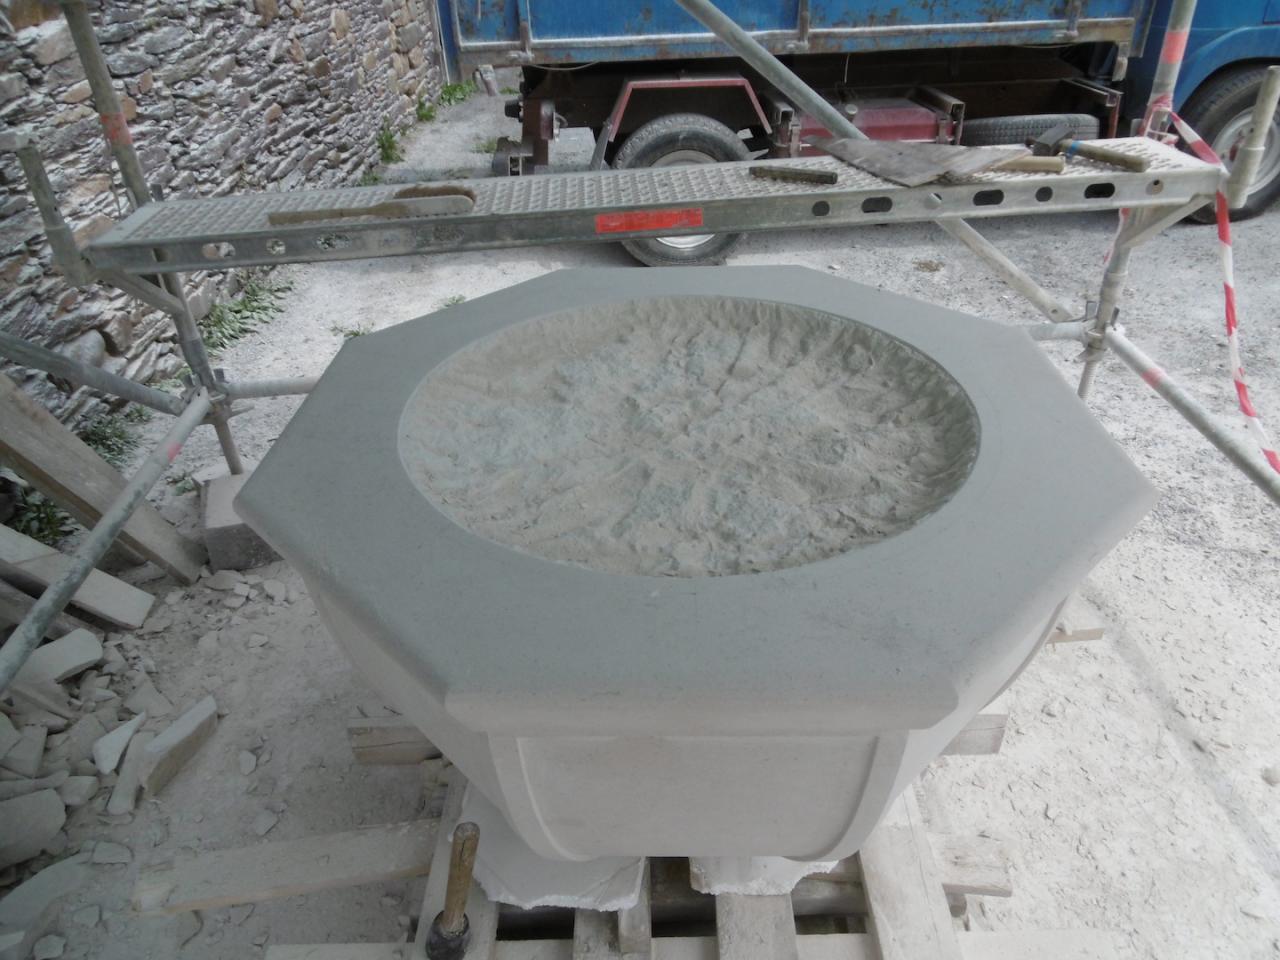 Carving of the basin